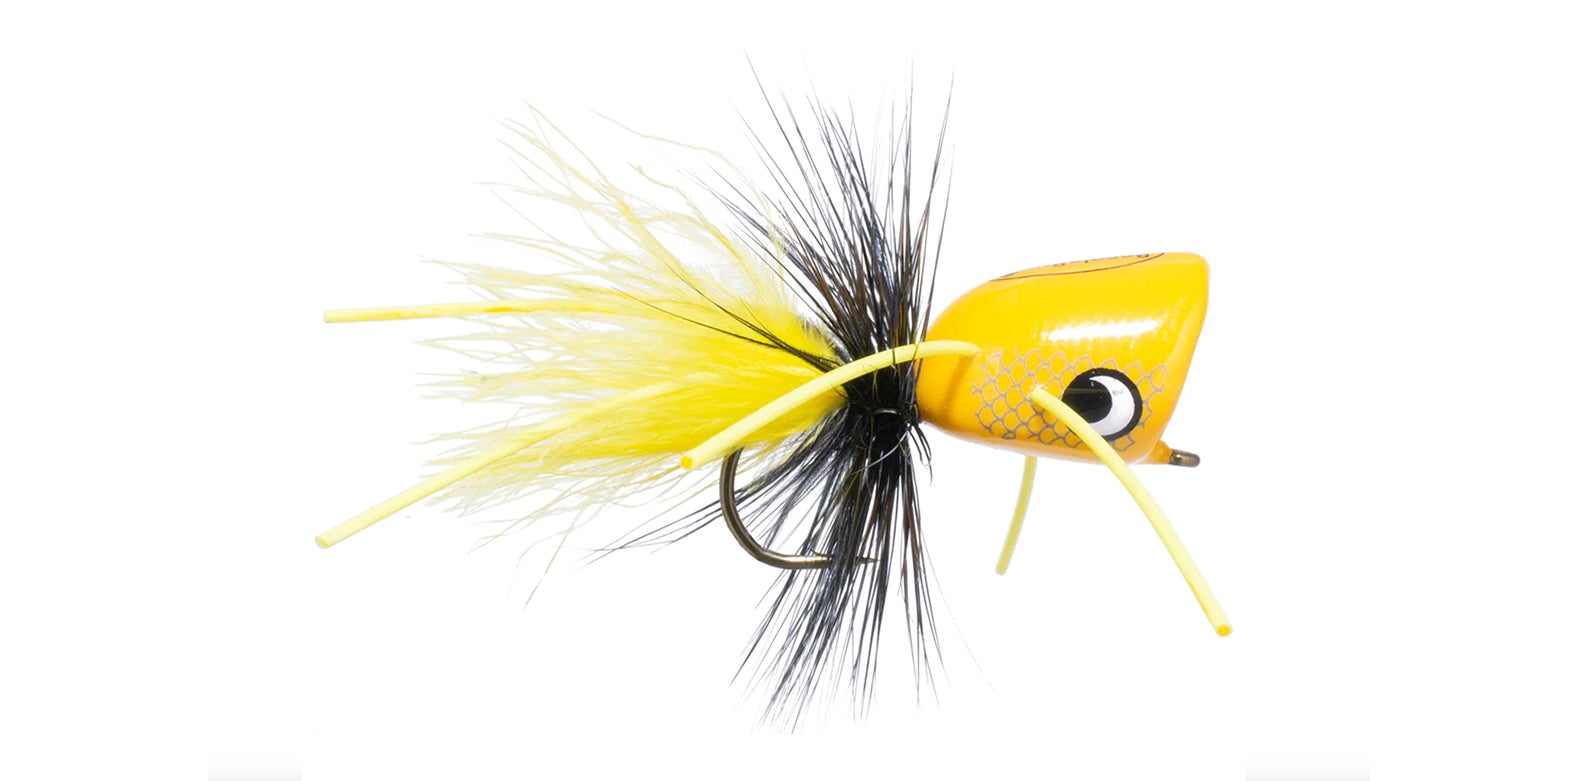 The 25 Greatest Flies of All Time